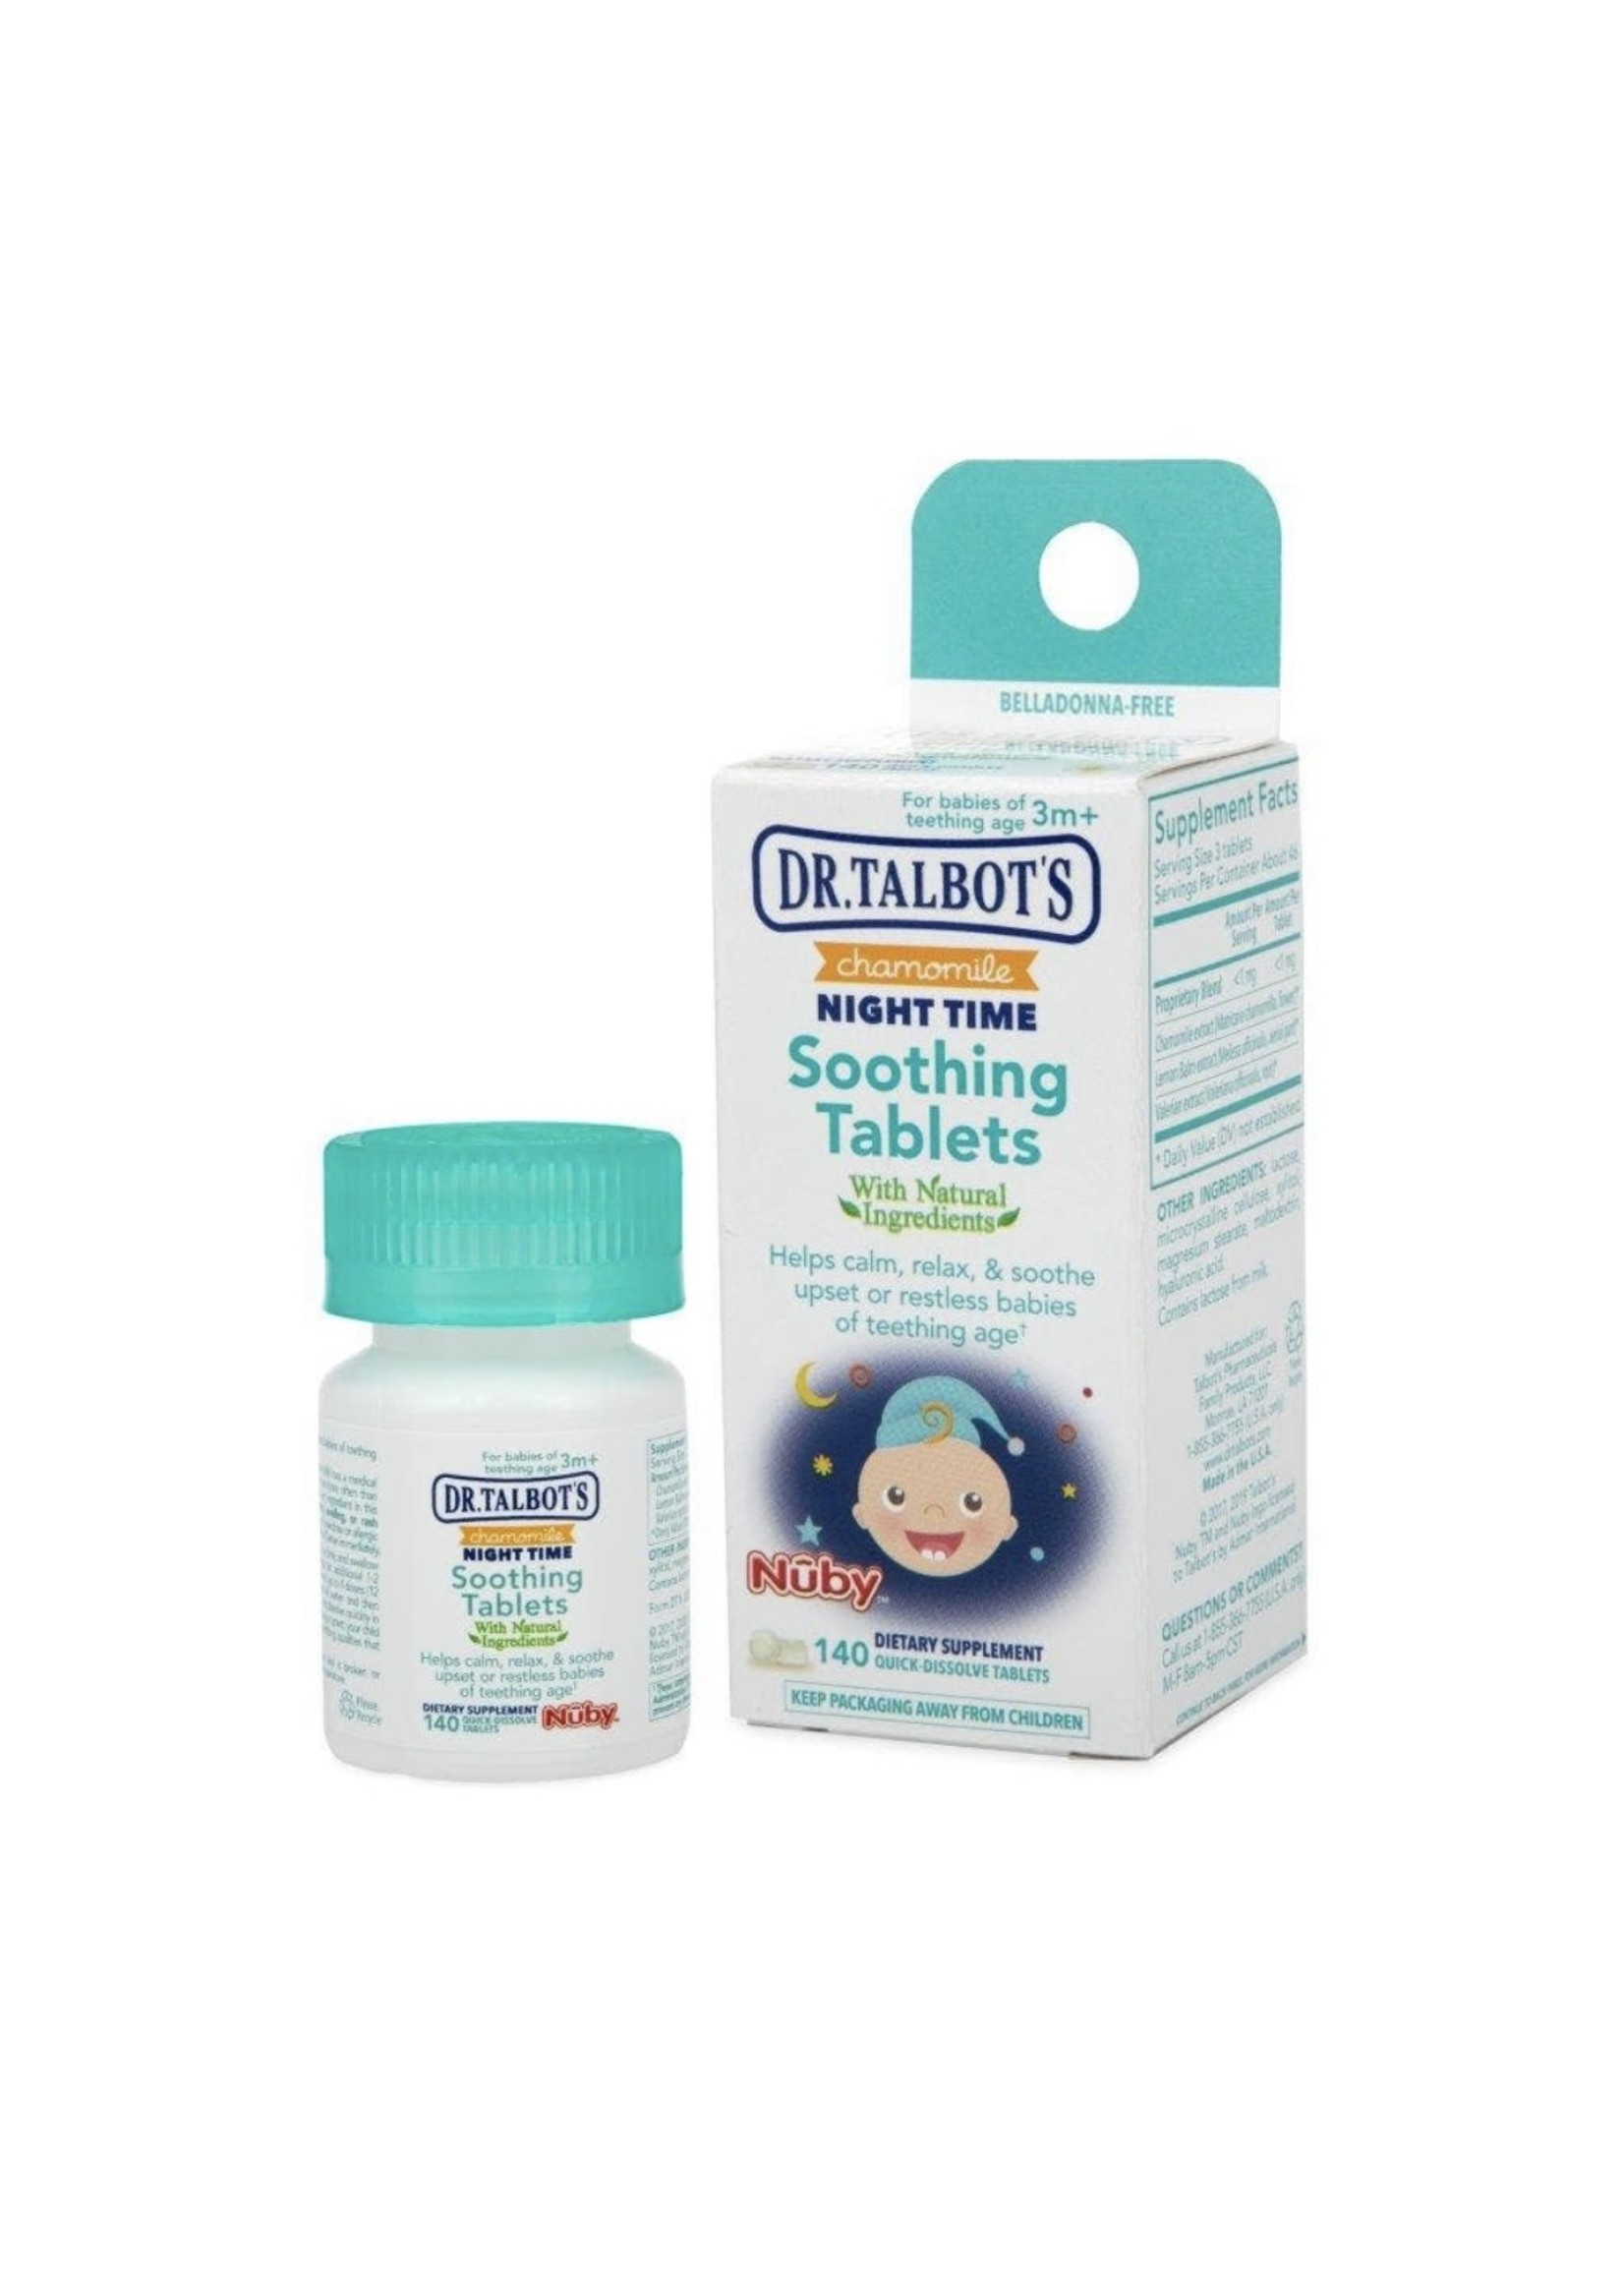 Dr. Talbots Night Time Soothing Tablets